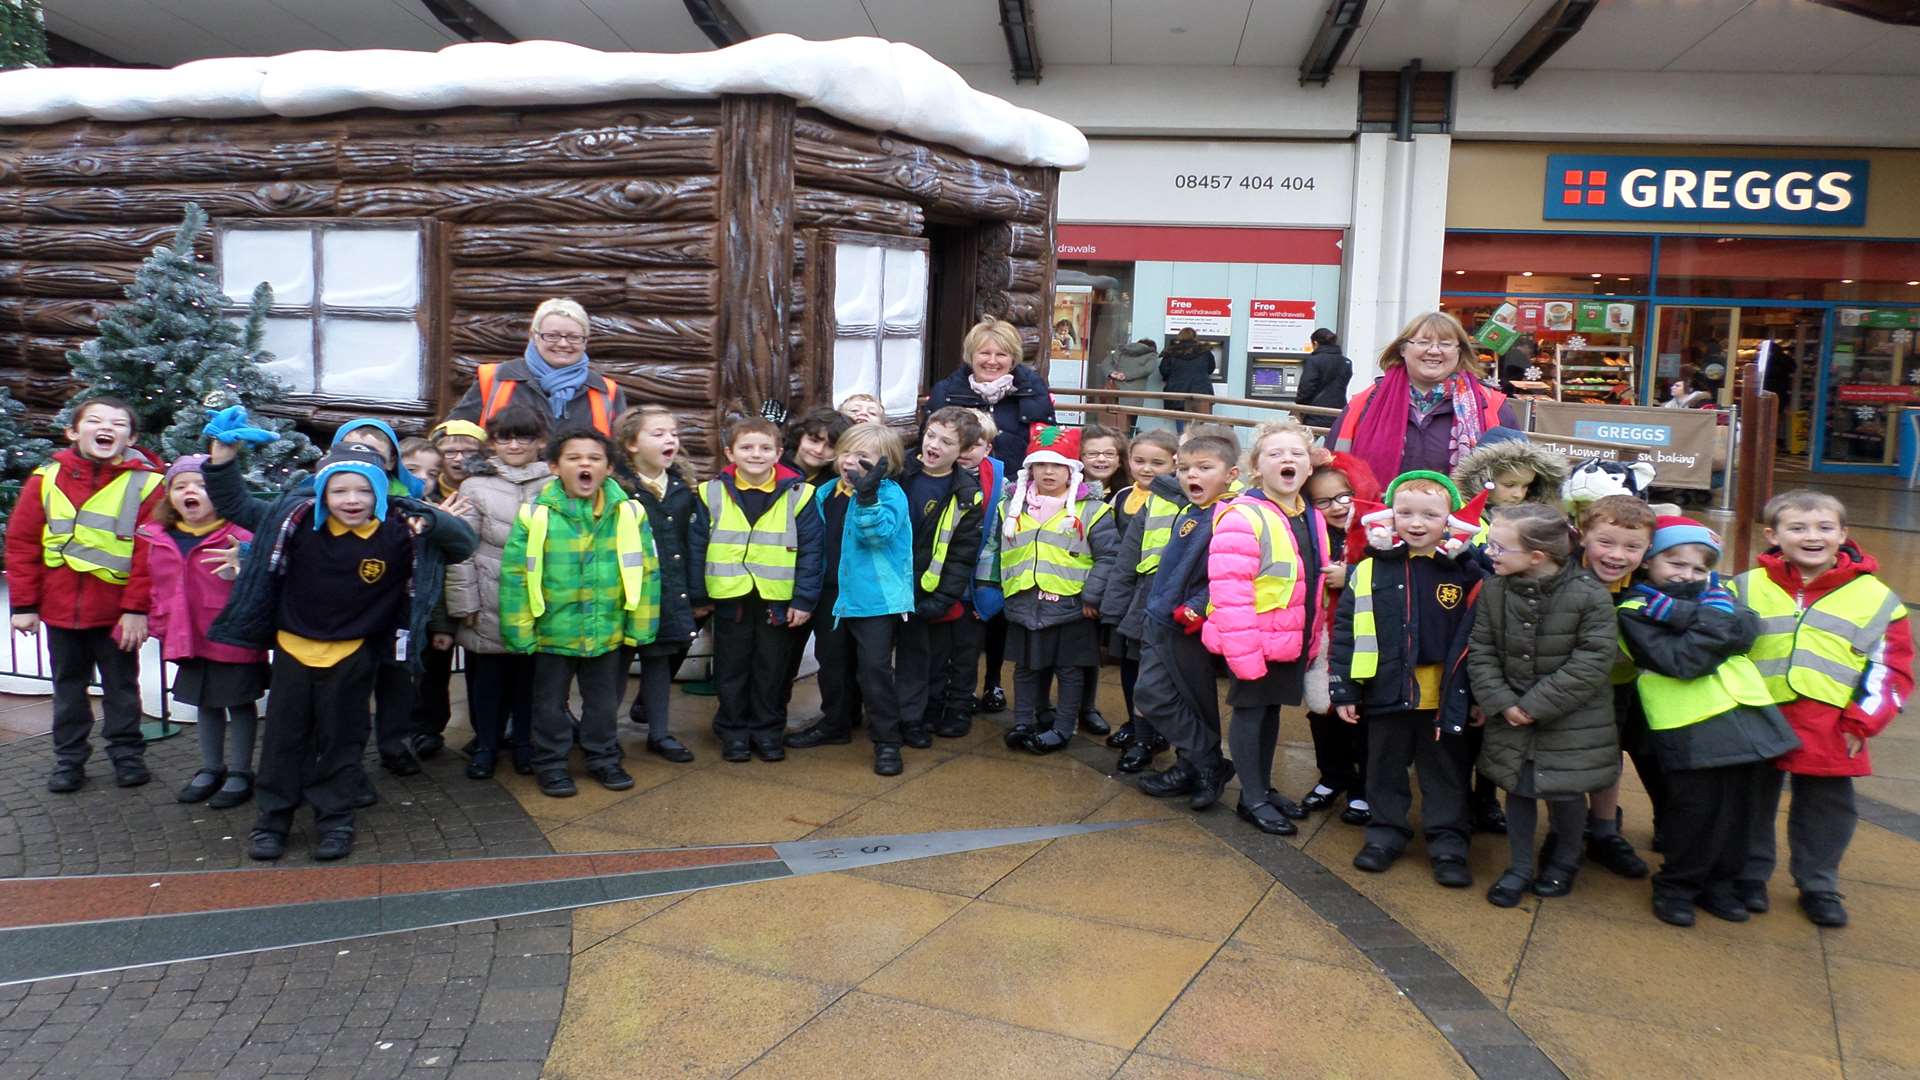 Joss Bay Class from St Mildred's Infant School in Broadstairs won the Walk to School Challenge prize of a visit to Santa at Westwood Cross.